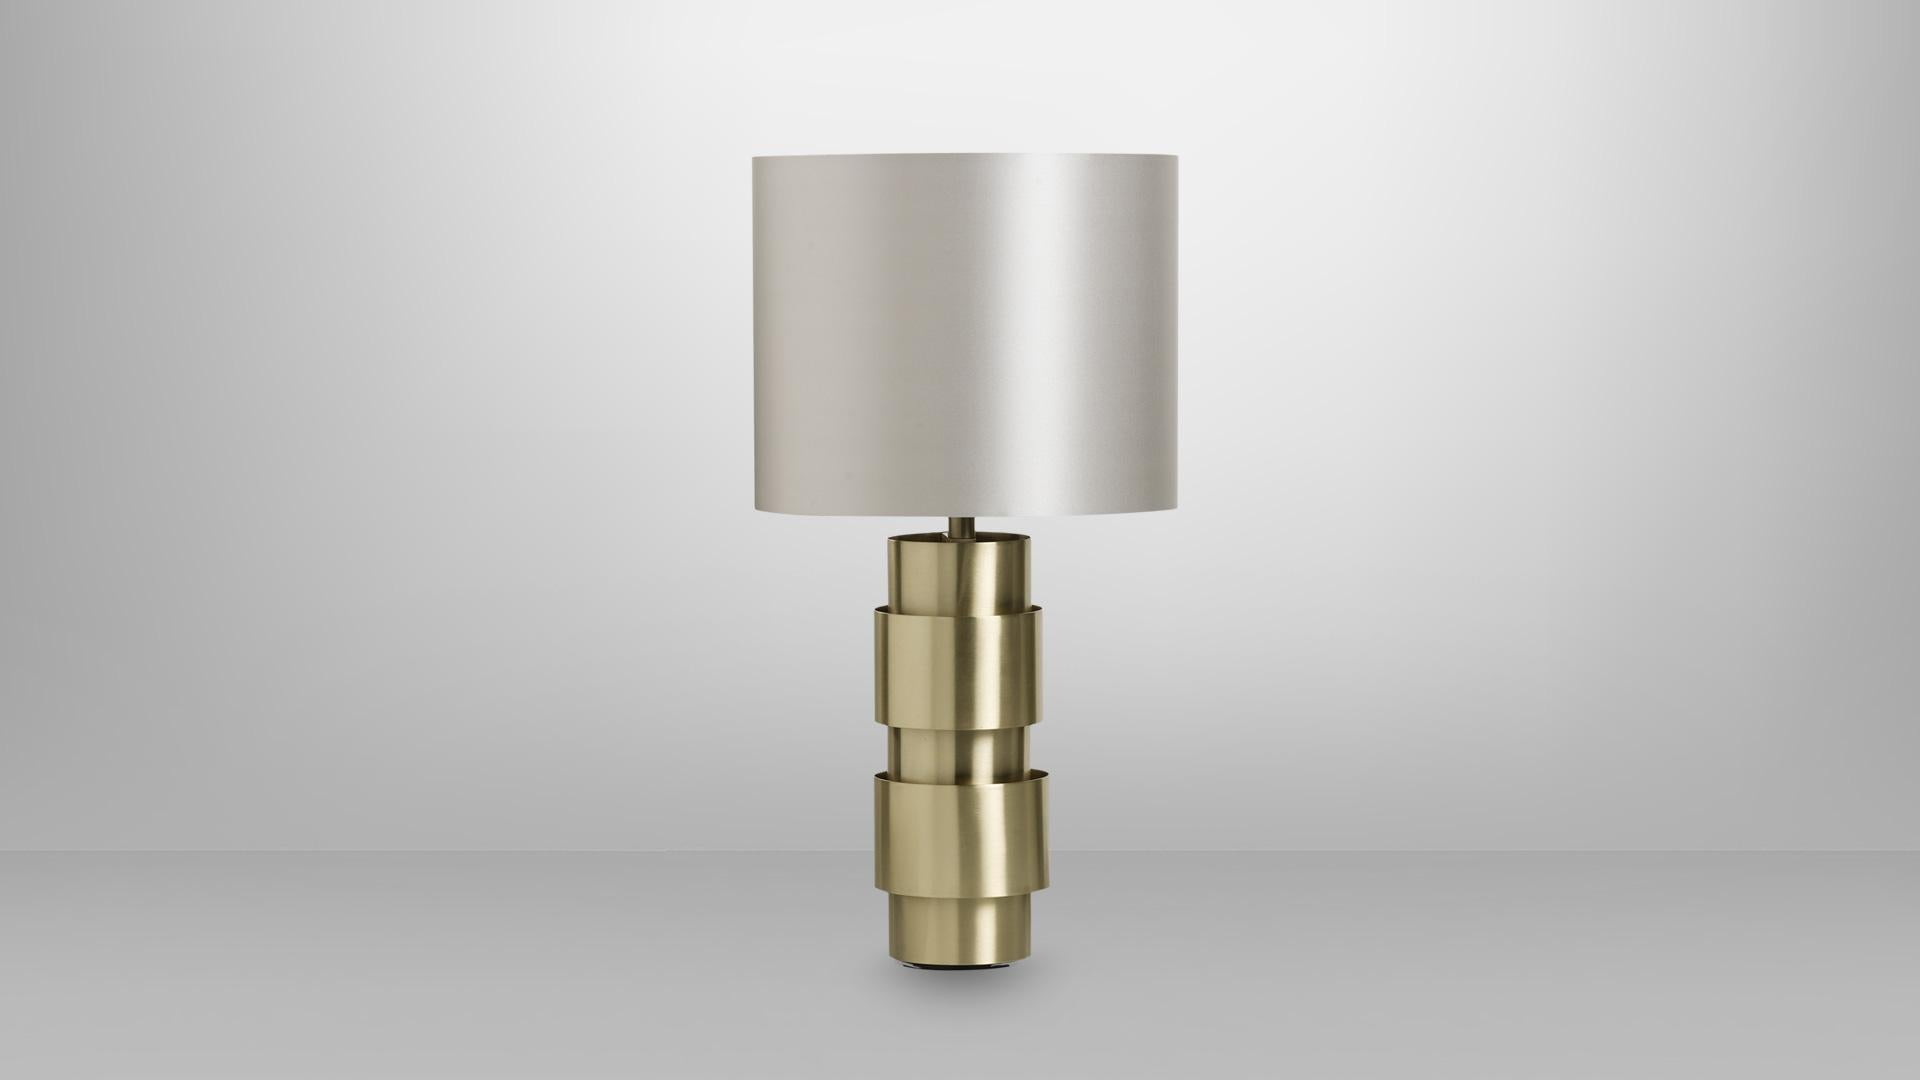 Ring table lamp by CTO Lighting
Materials: bronze base with dove grey silk shade and silk diffuser
Also available in satin brass base with dove grey silk shade and silk diffuser
Dimensions: H 64 x W 30 cm 

All our lamps can be wired according